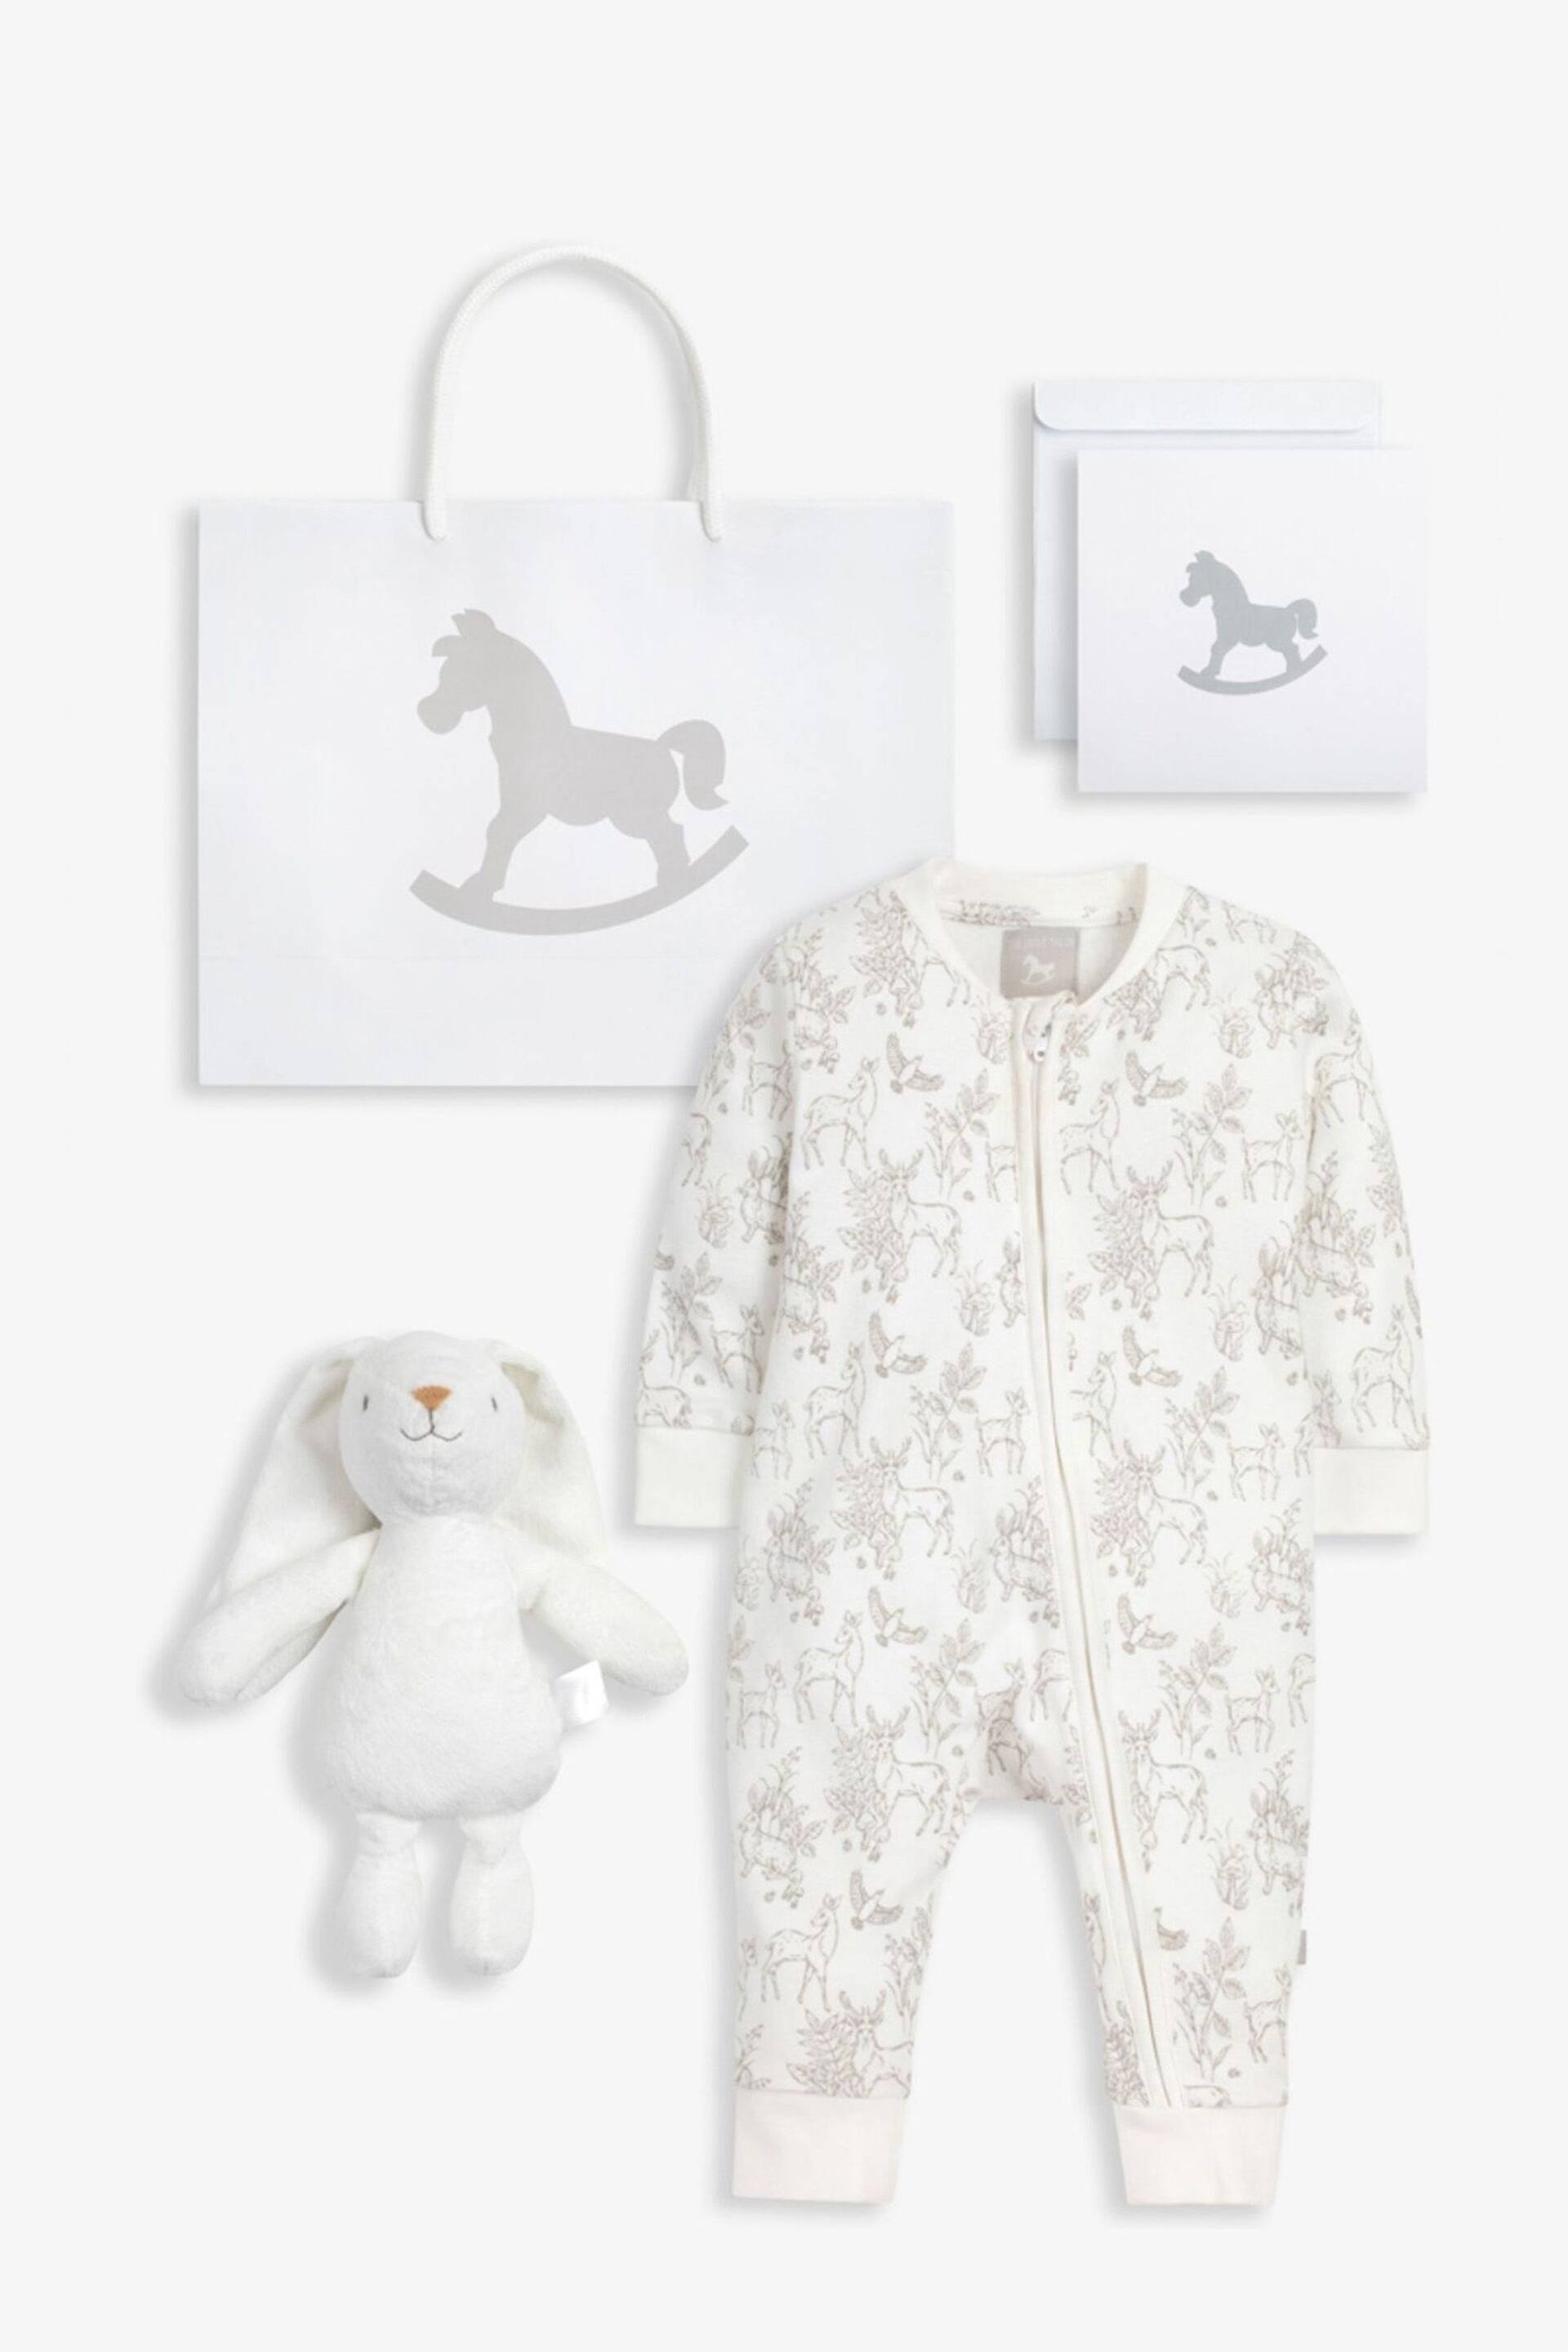 The Little Tailor Baby Sleepsuit And Toy Bunny 2 Piece Gift Set - Image 1 of 7